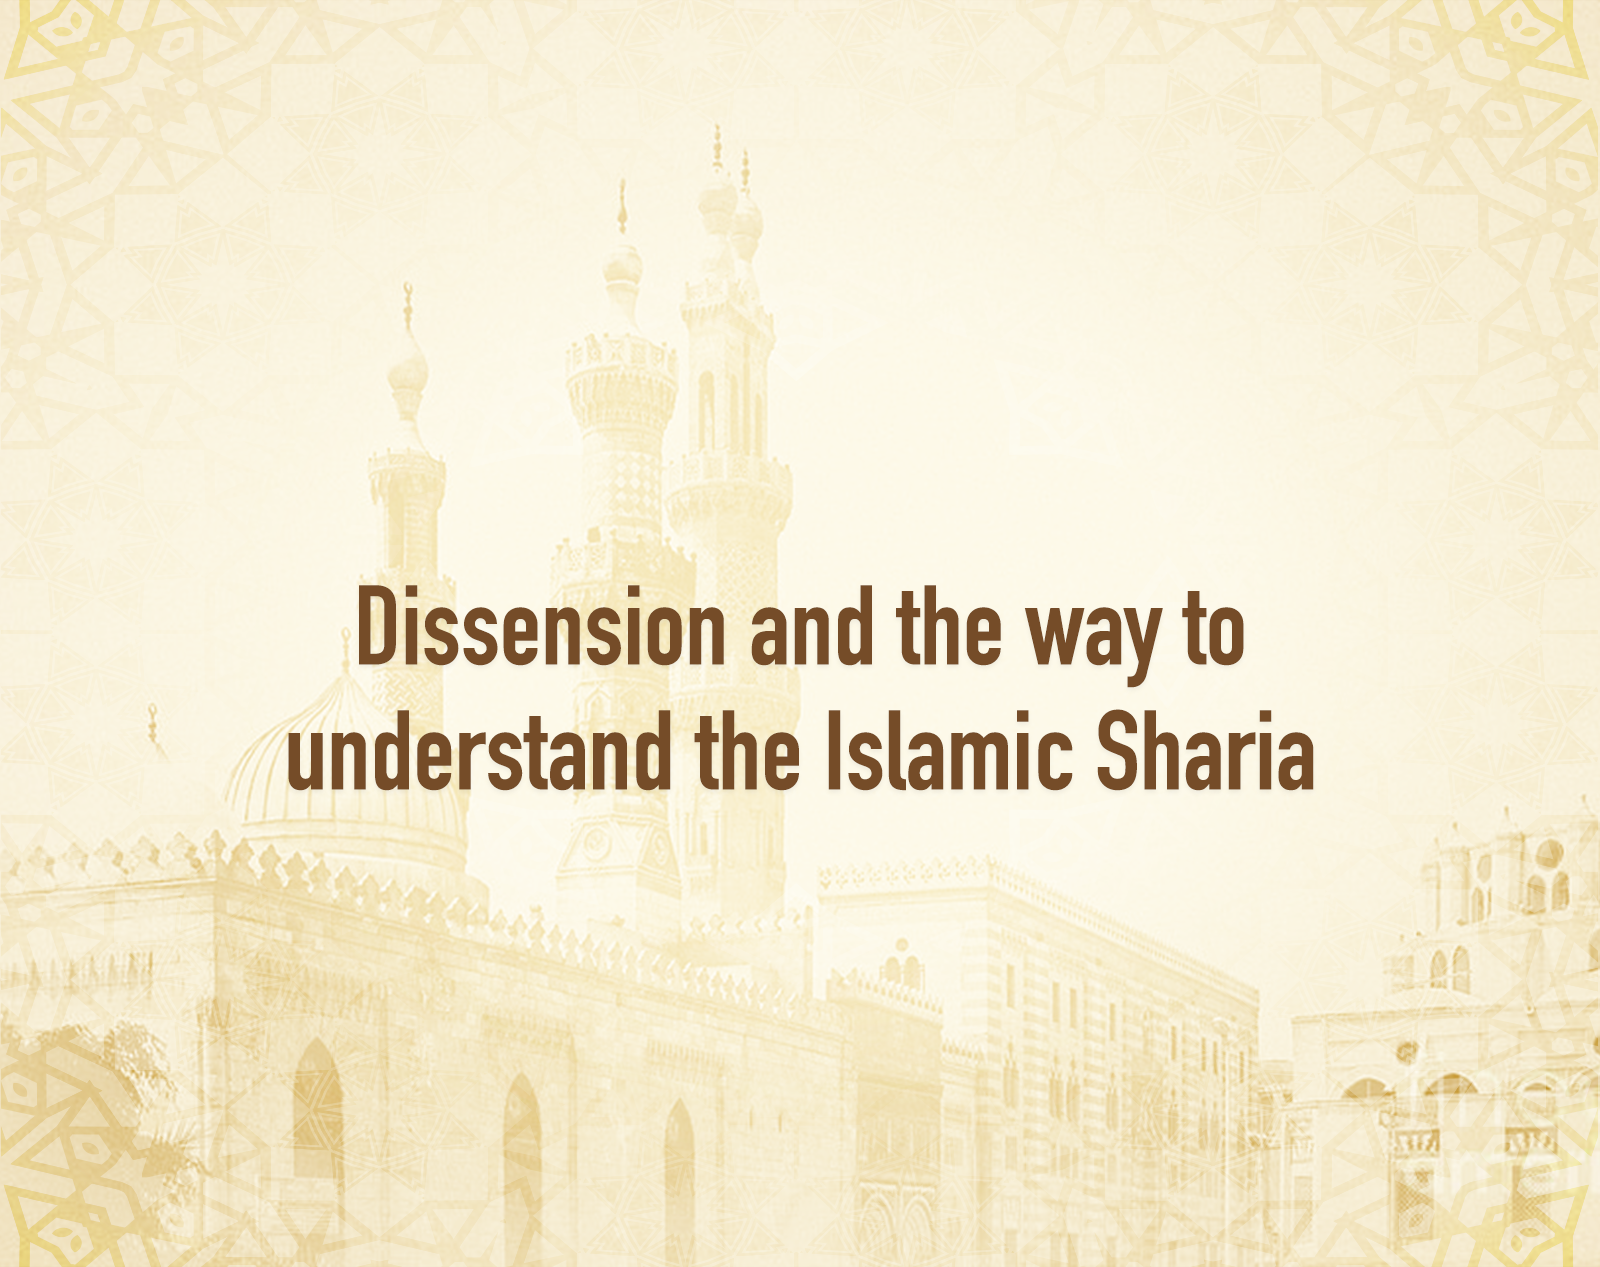 Dissension and the way to understand the Islamic Sharia.png